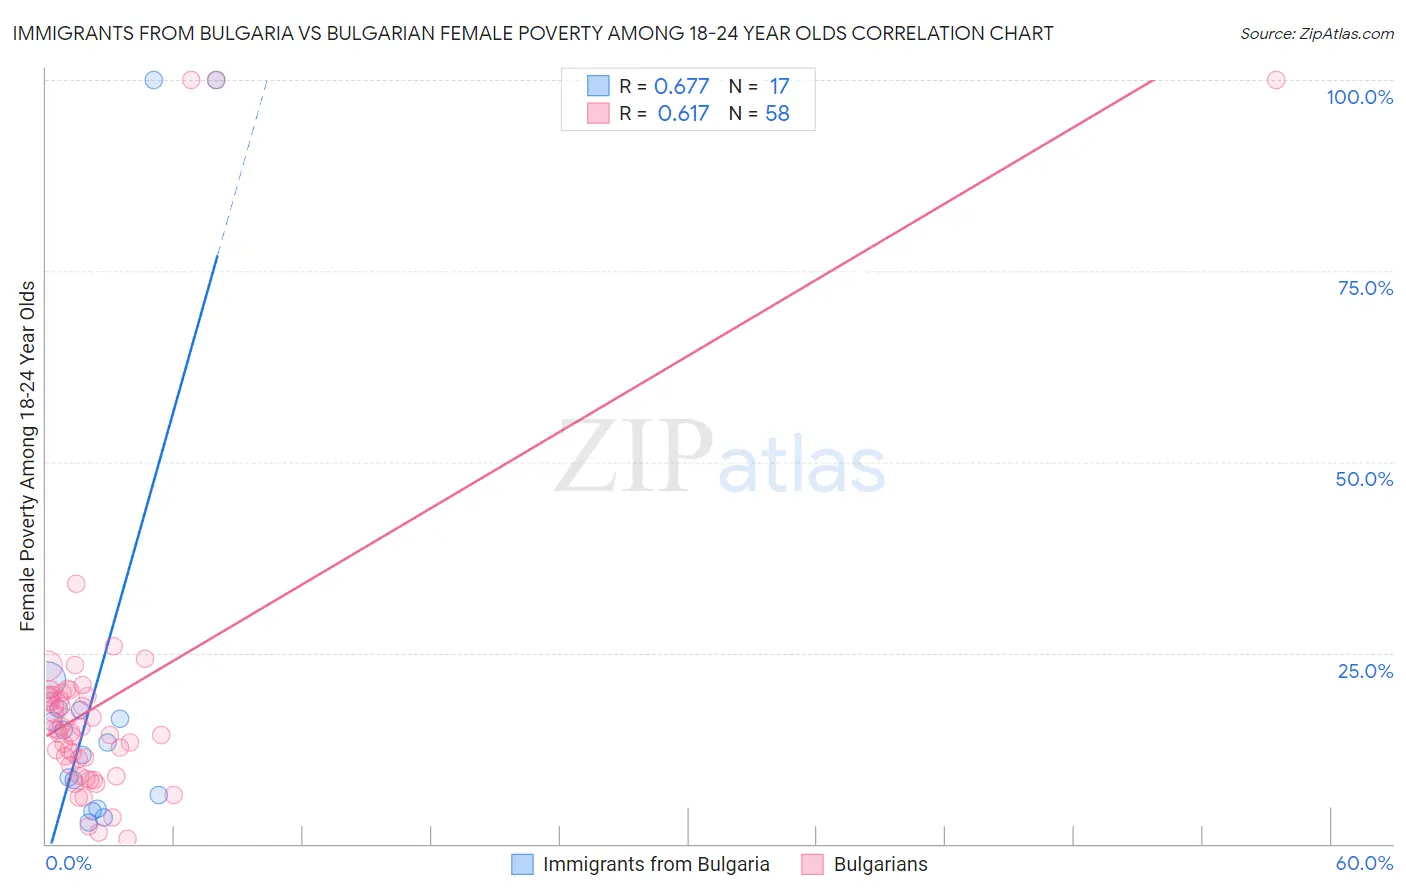 Immigrants from Bulgaria vs Bulgarian Female Poverty Among 18-24 Year Olds